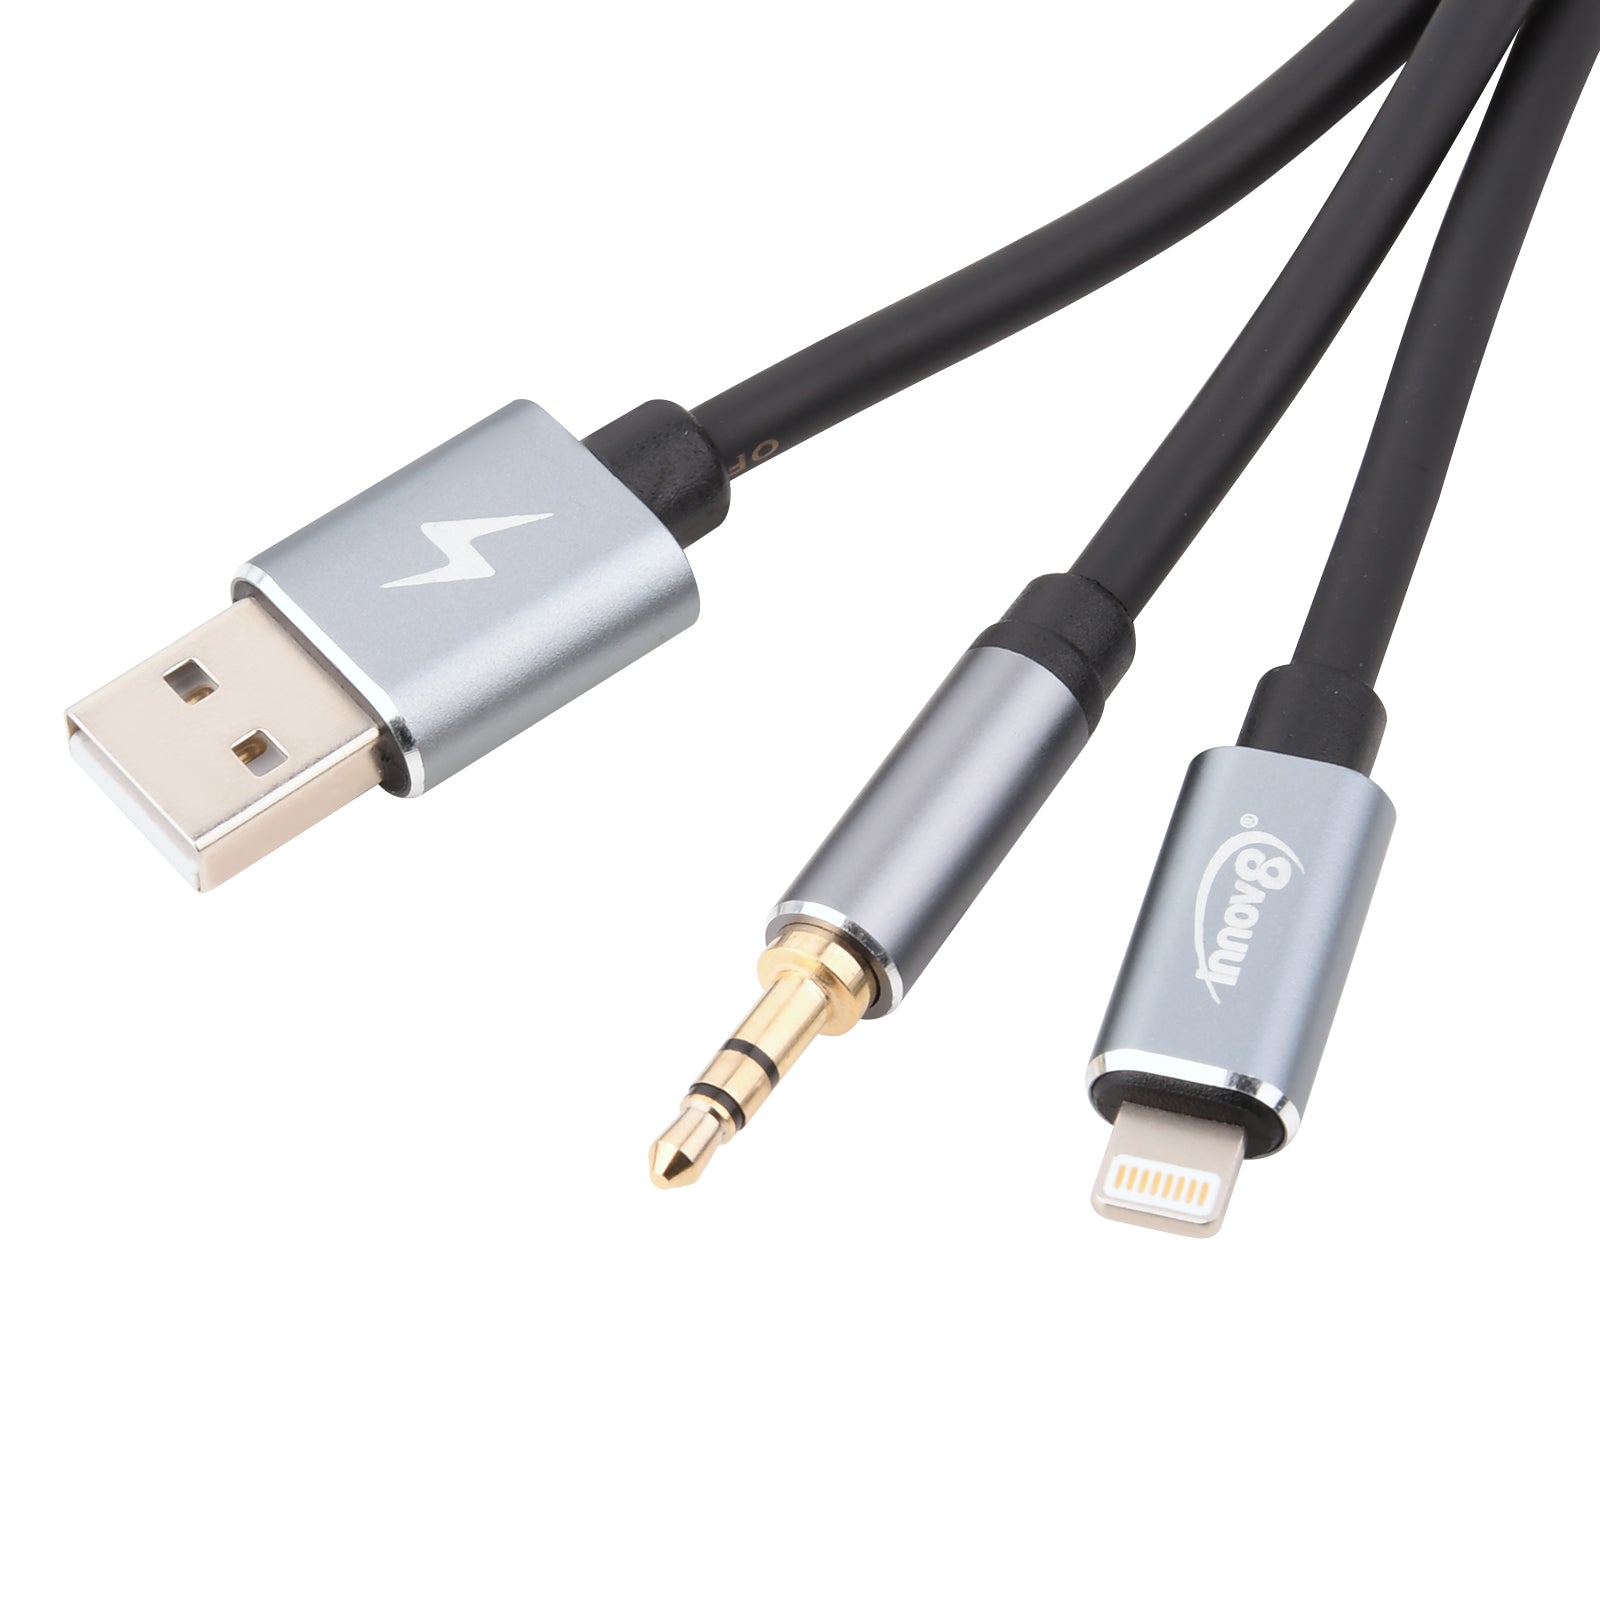 8-Pin to 3.5mm Aux Jack Audio Cable with USB Charge Male for iPhone iPod